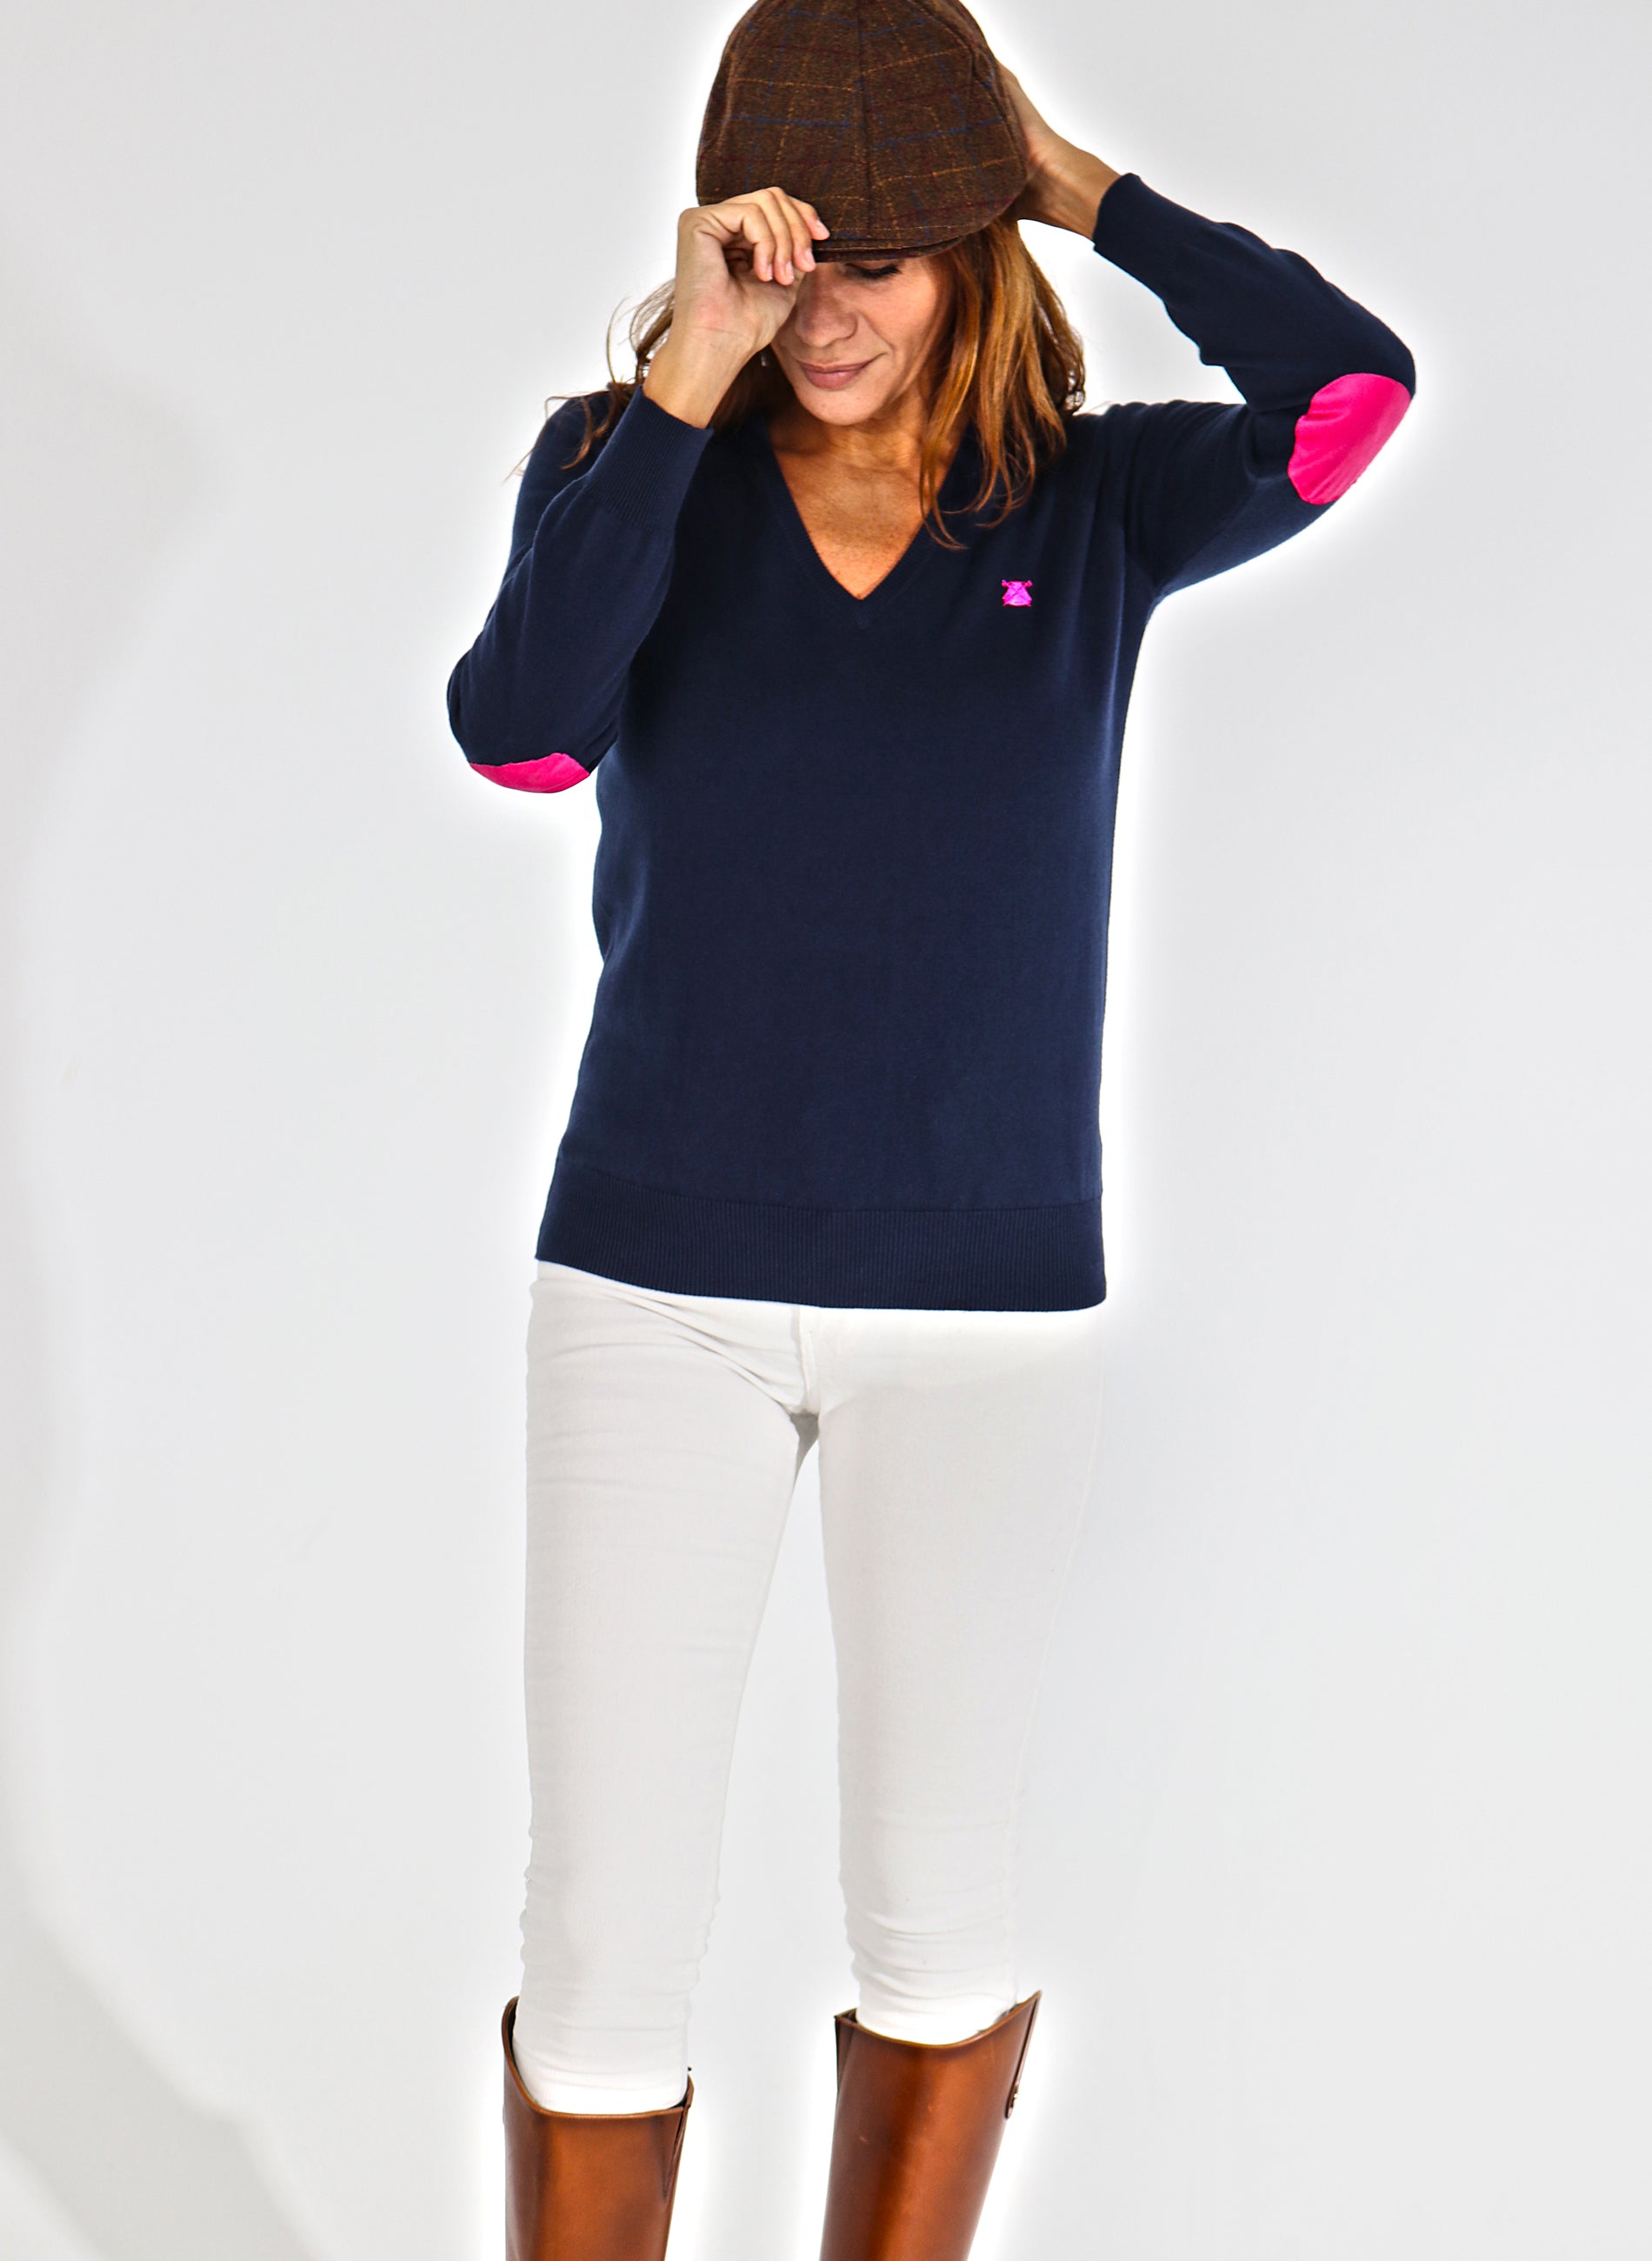 Navy Blue Women's V-Neck Sweater with Elbow Patches